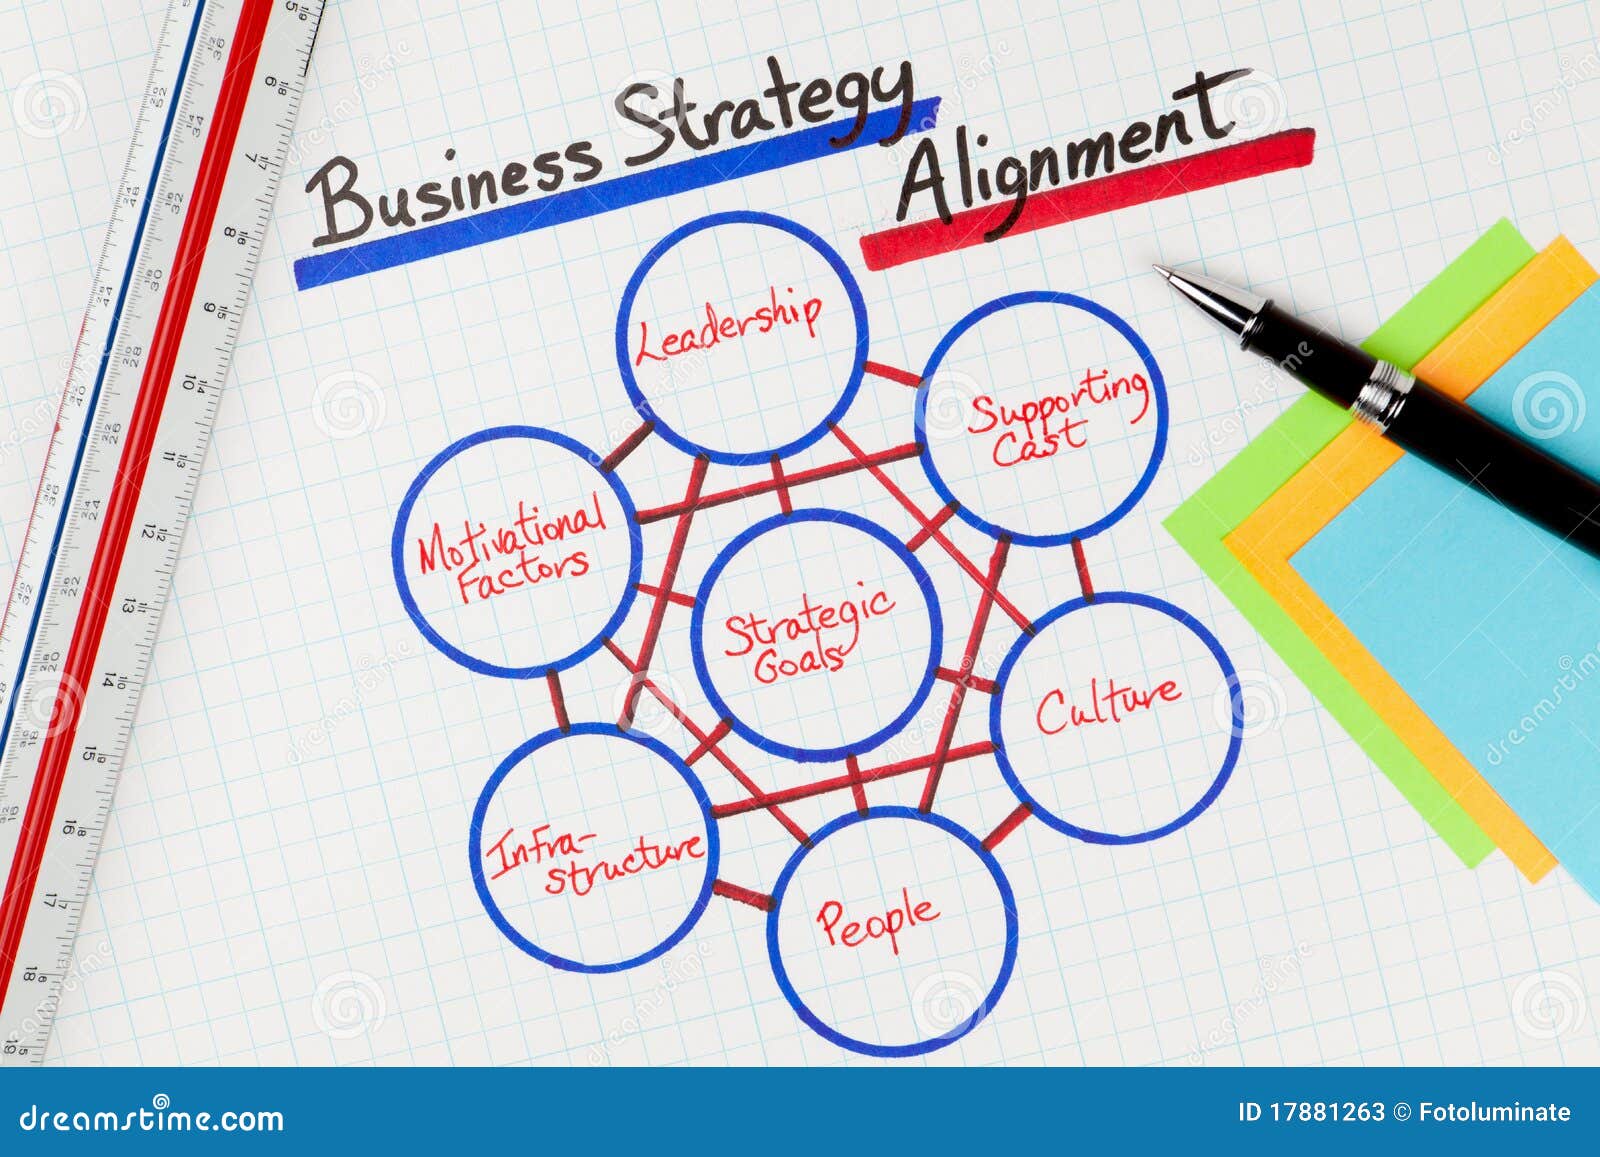 business strategy alignment methodology diagram